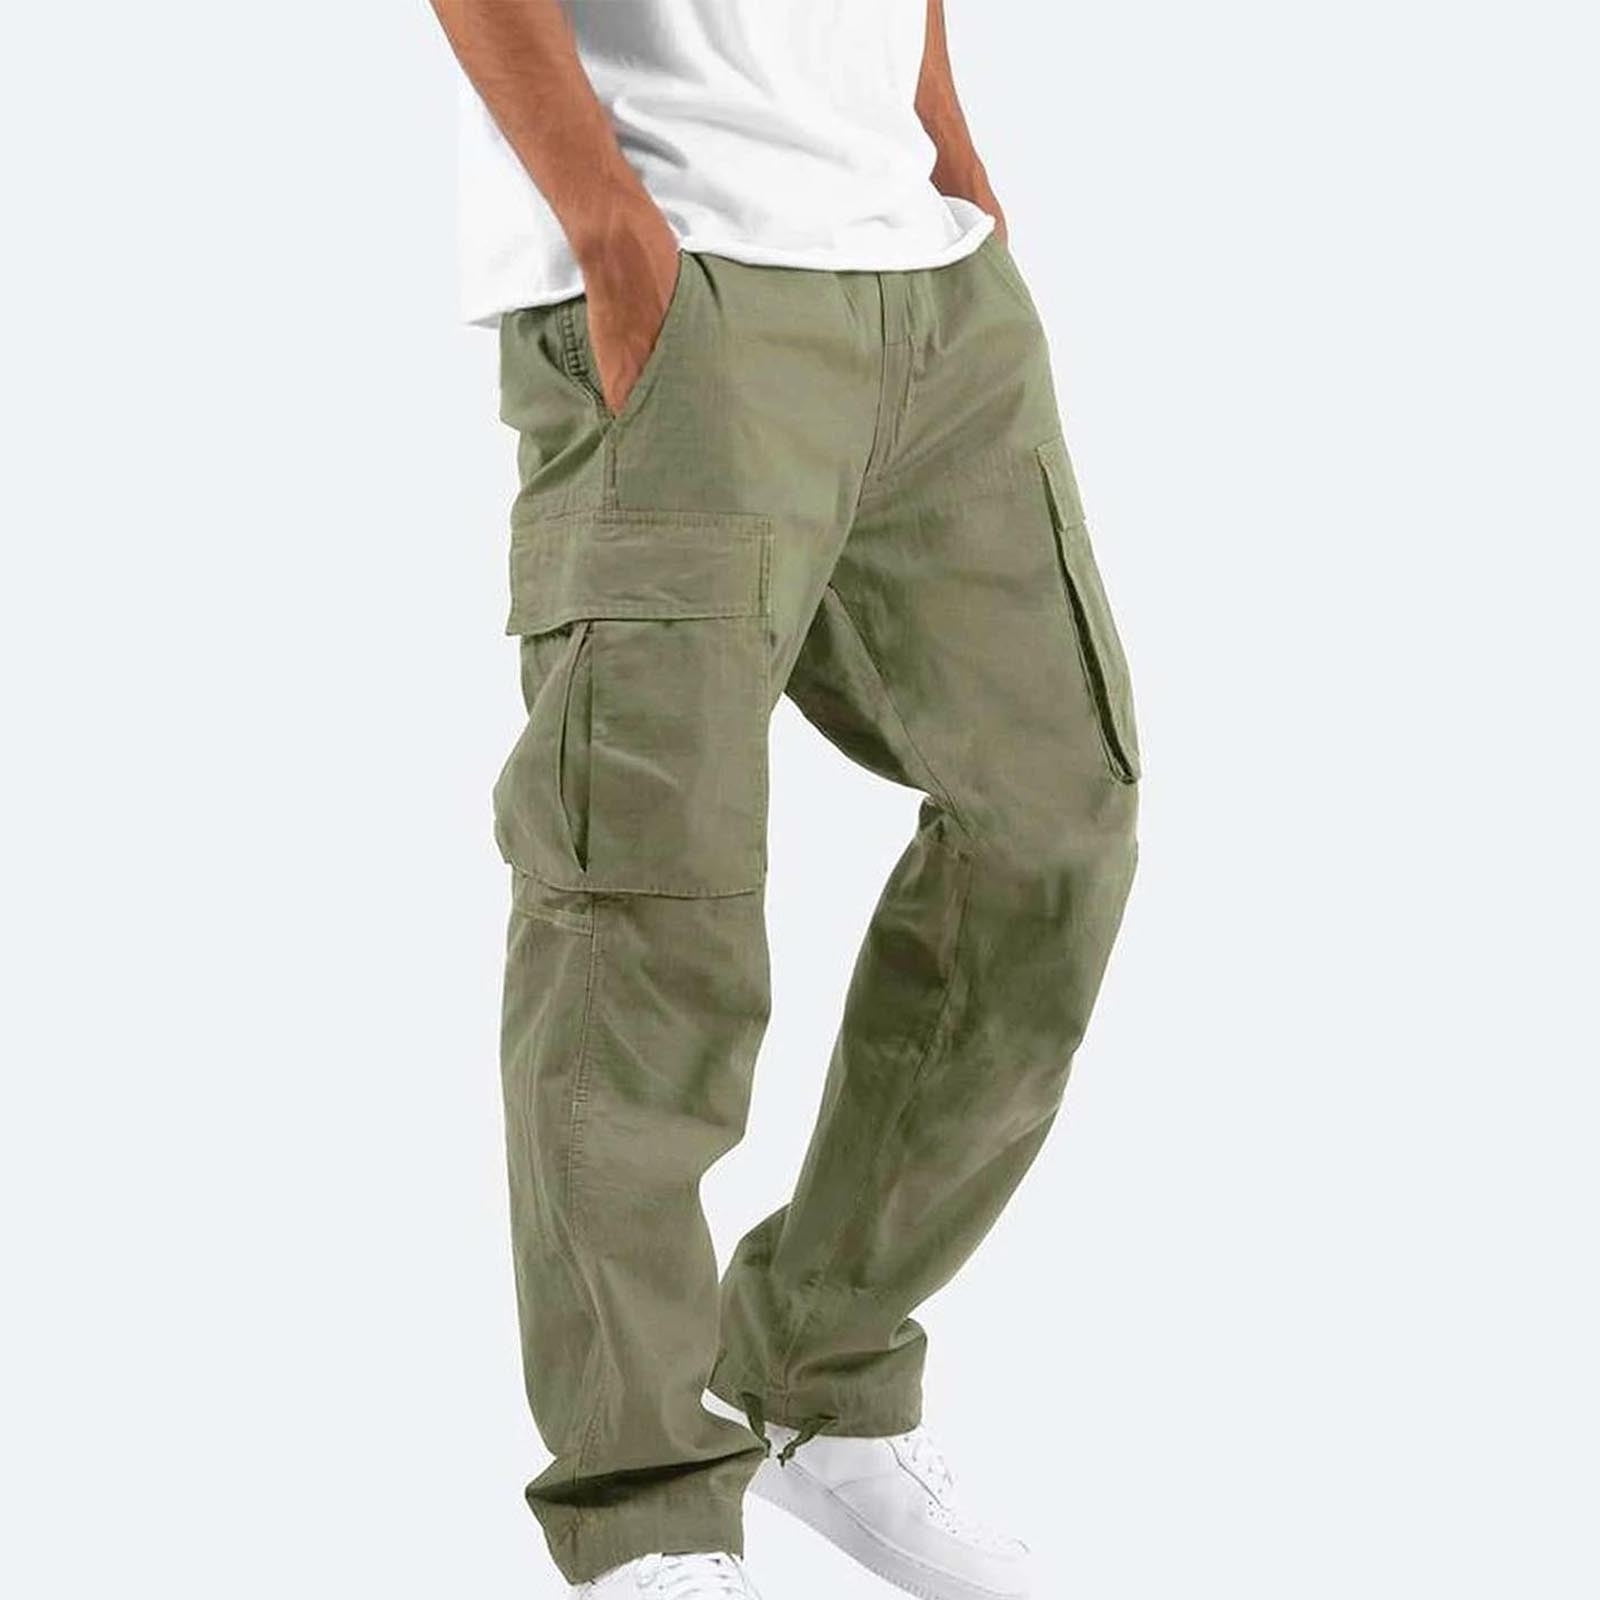 XFLWAM Men's Cargo Cargo Lightweight Work Pants Hiking Ripstop Cargo Pants  Relaxed Fit Mens Cargo Pant-Reg and Big and Tall Sizes Army Green 5XL 